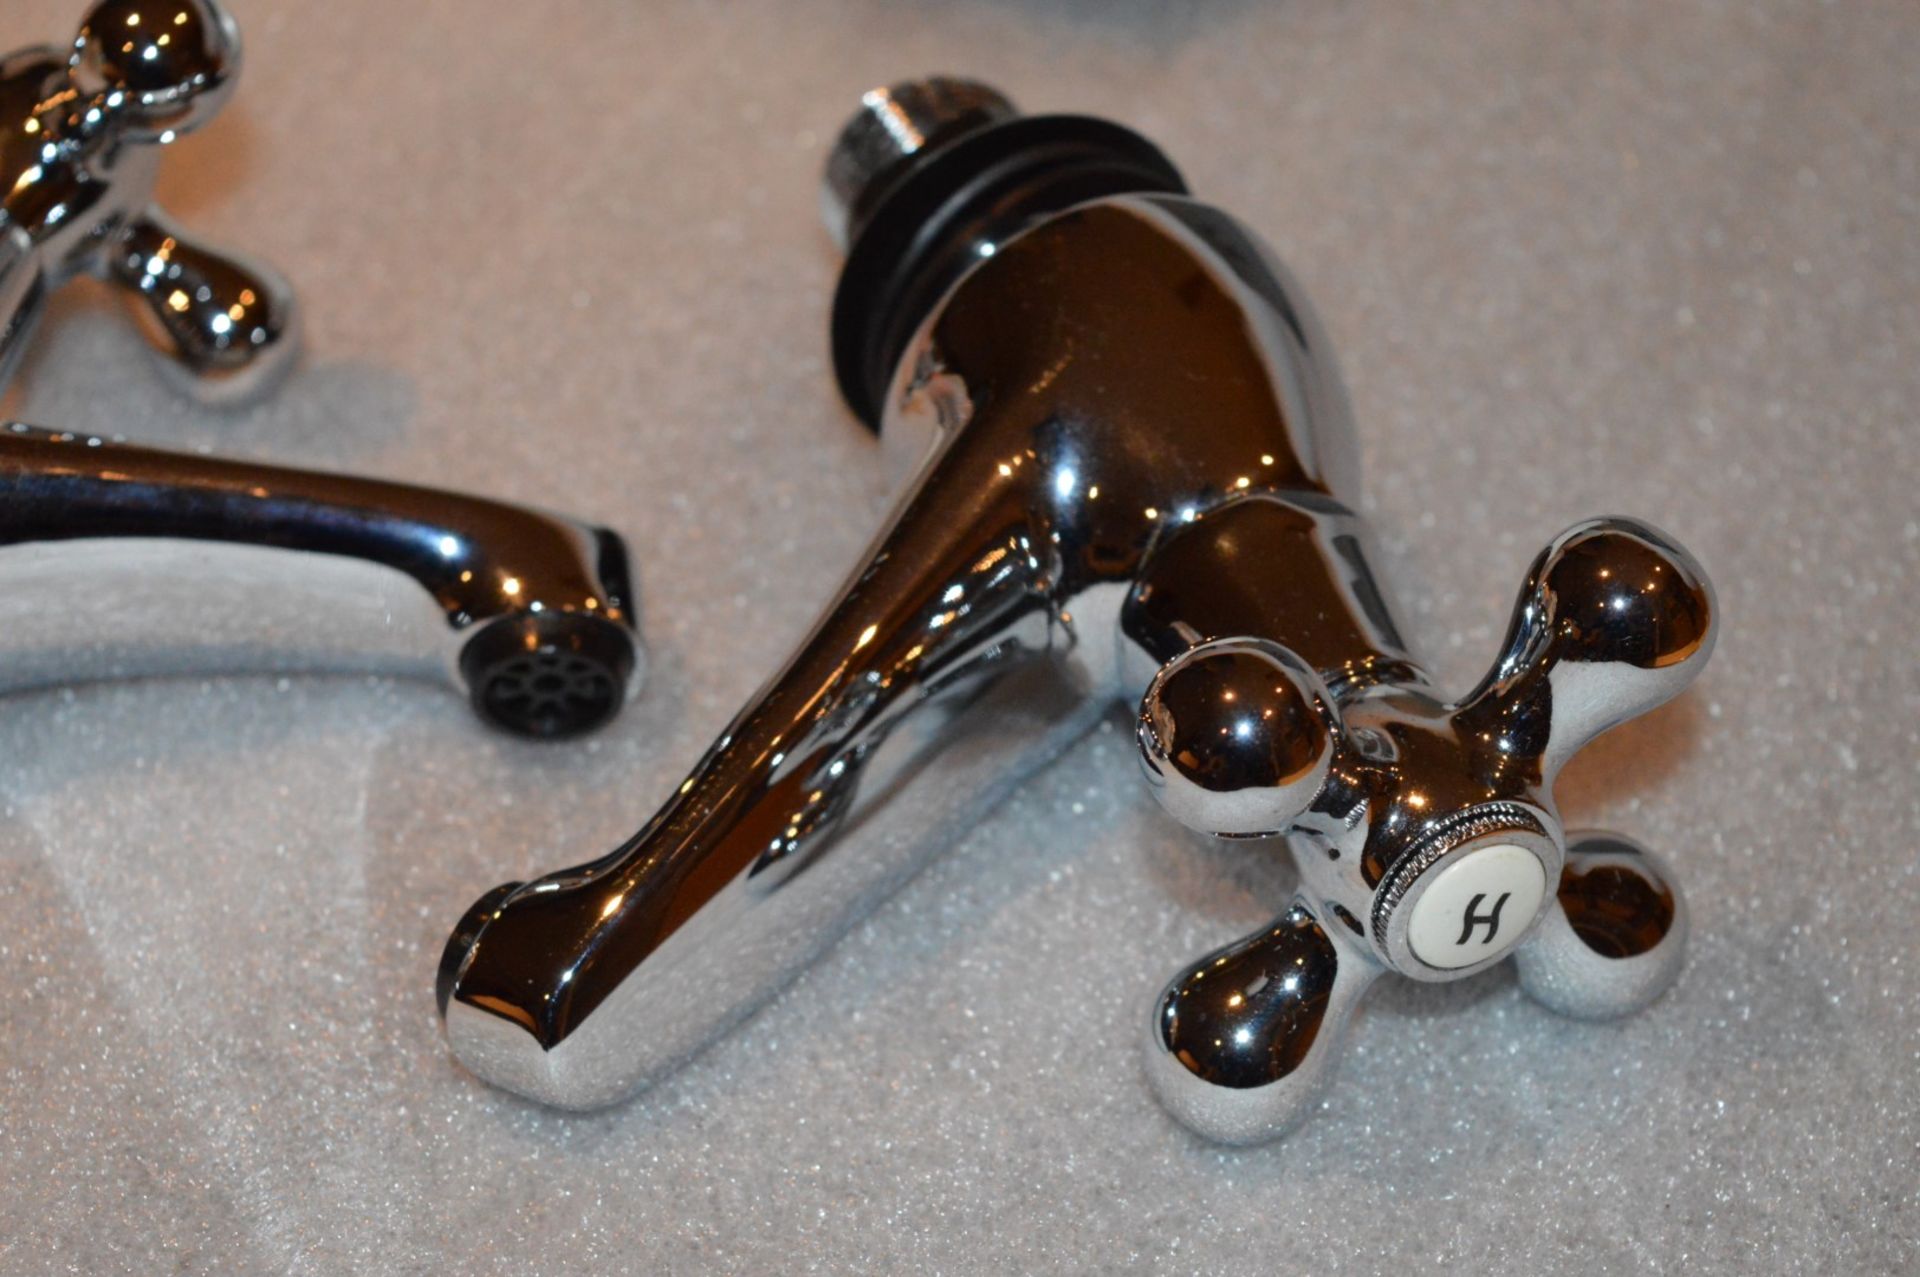 1 x Pair of Victorian Bath Taps - Traditional Style With Chrome Finish - New Stock - CL010 - Ref - Image 2 of 4